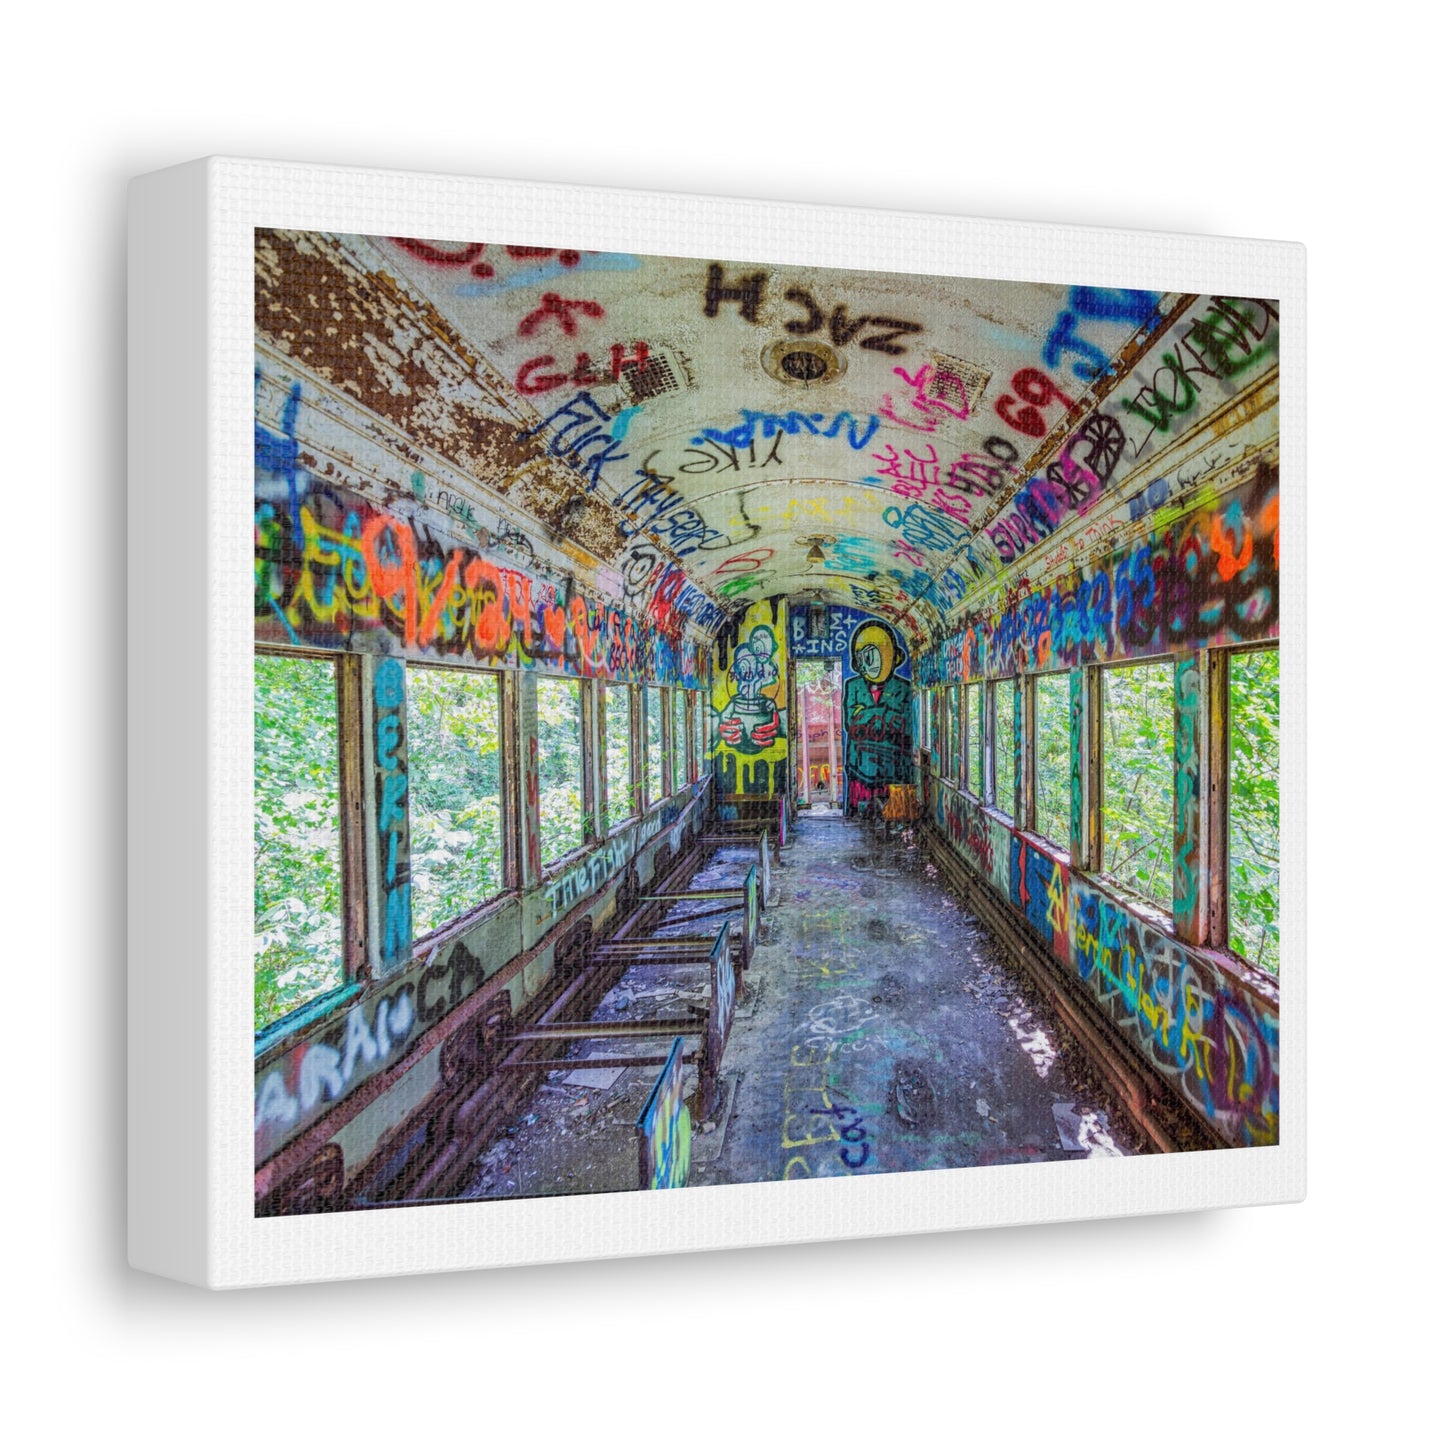 Abandoned Passenger Train Car in Lambertville, New Jersey, Art Print from the Original on Canvas